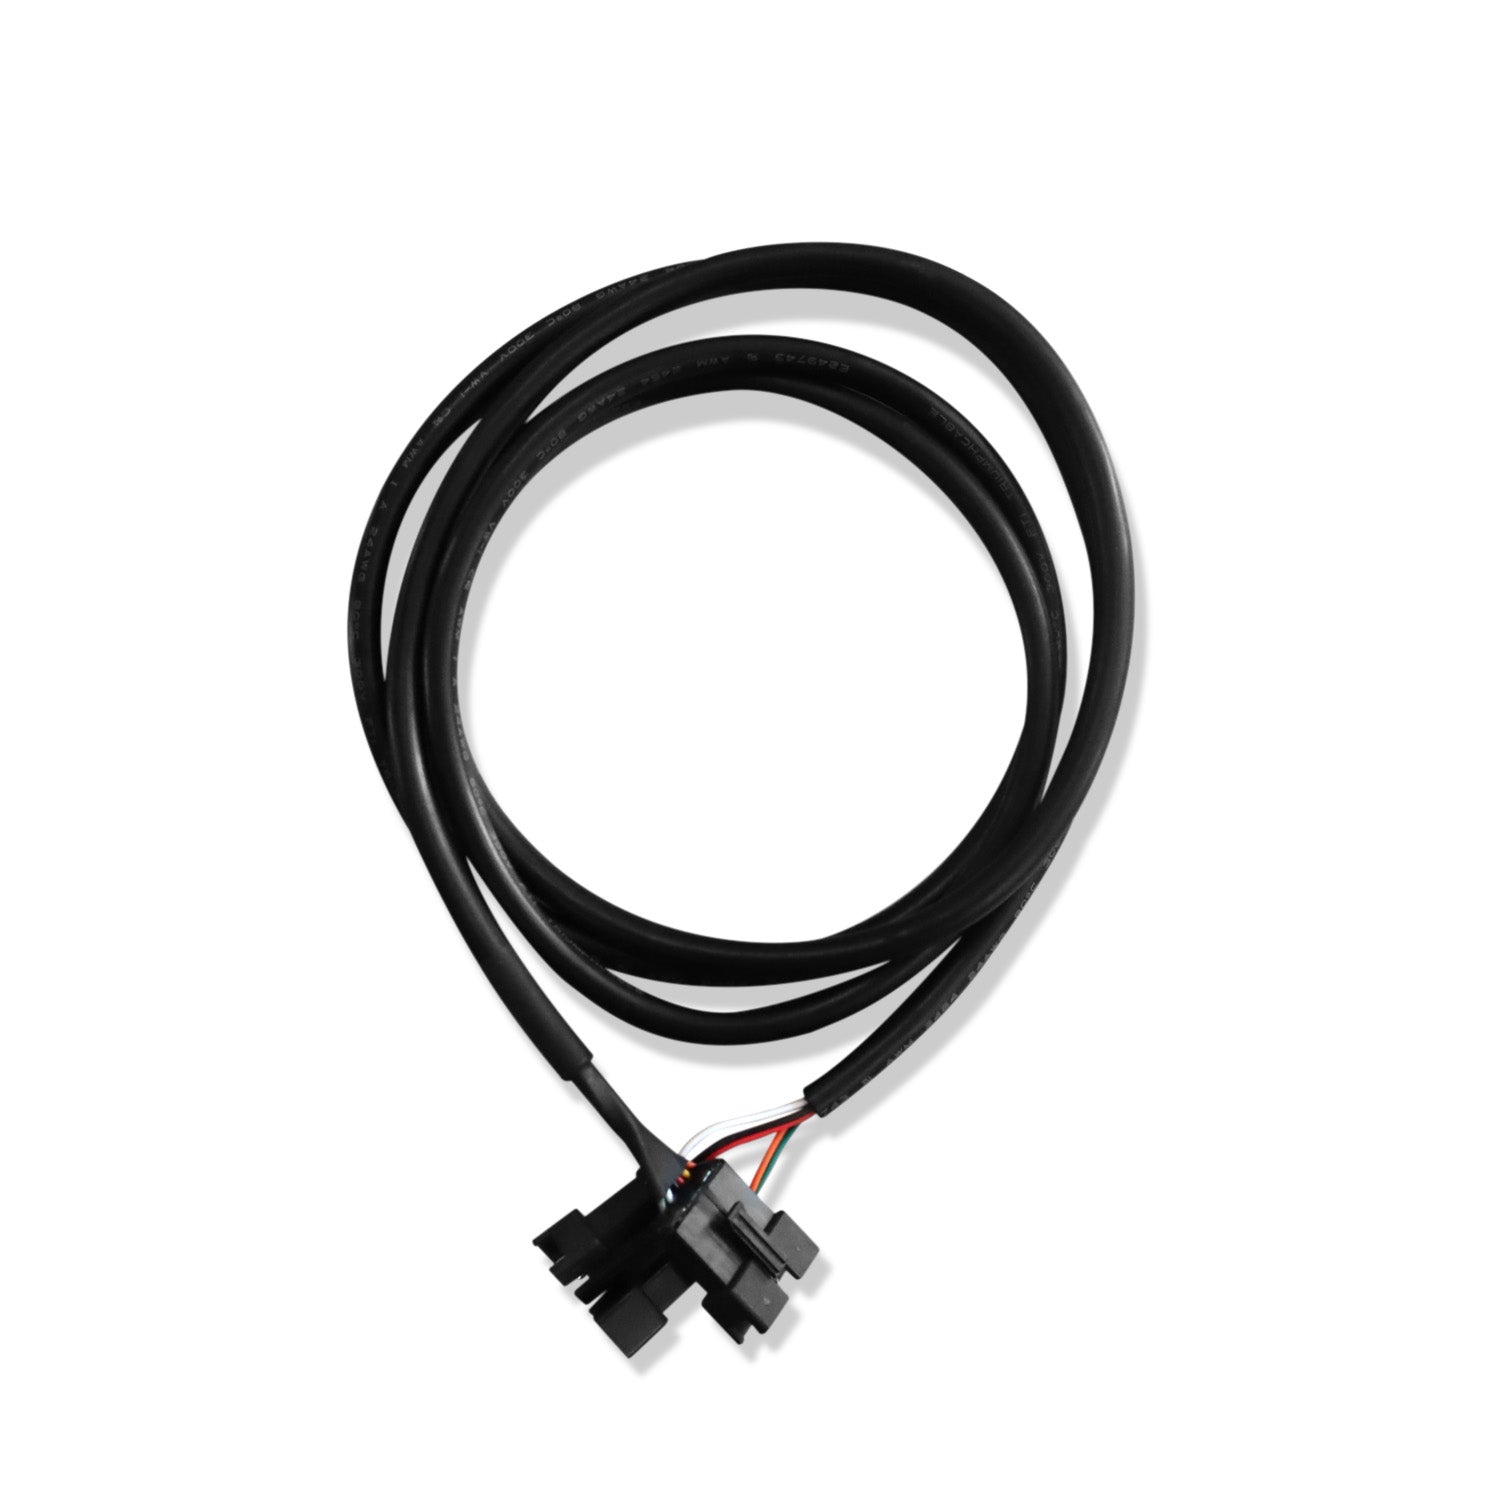 Hiboy S2 Lite Display Controller Cable